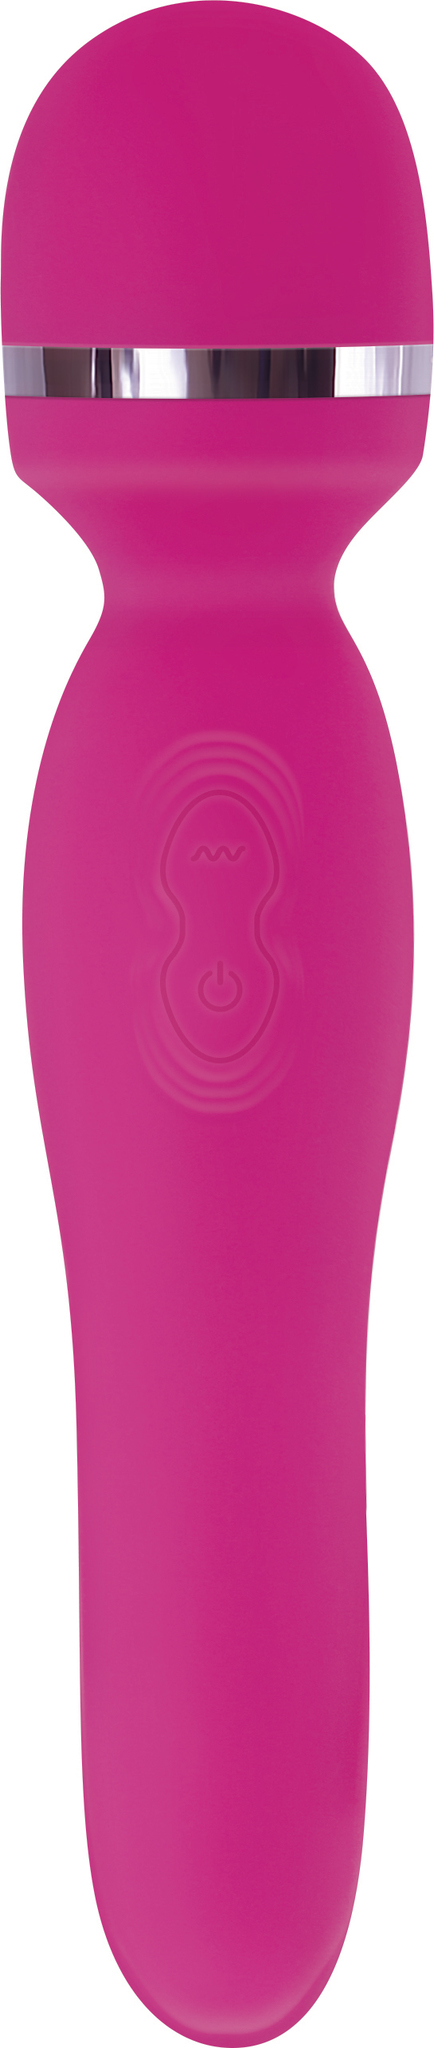 ADAM & EVE INTIMATE CURVES RECHARGEABLE WAND 